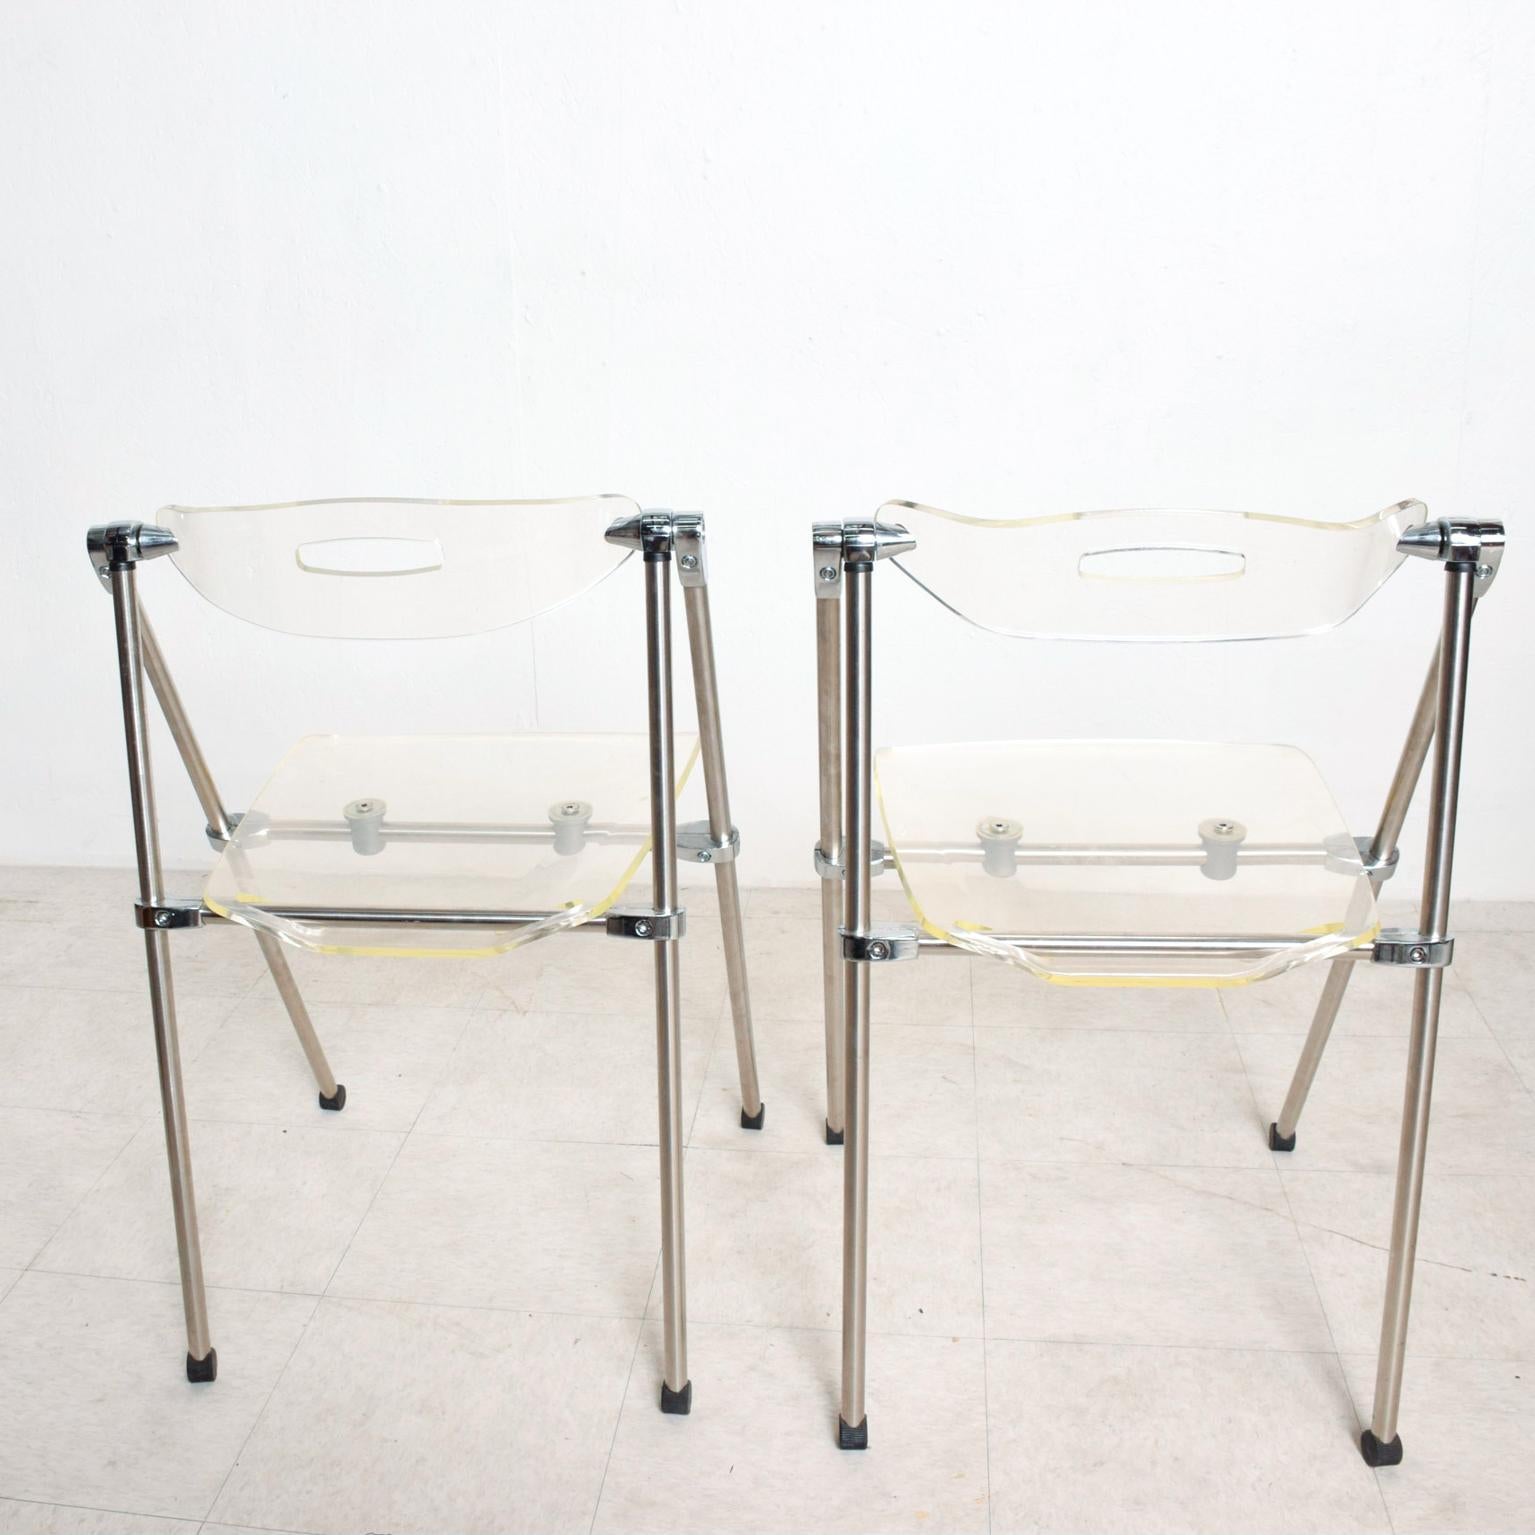 For Your Consideration: Mid Century Modern Italy 1960s Pair of Lucite Folding Chairs  Attributed to G. Piretti for Castelli.
Reference # SEATGM1213196 Chairs are an amazing Classic Modern Italian Design in Modern Lucite and Chrome.
Dimensions are: